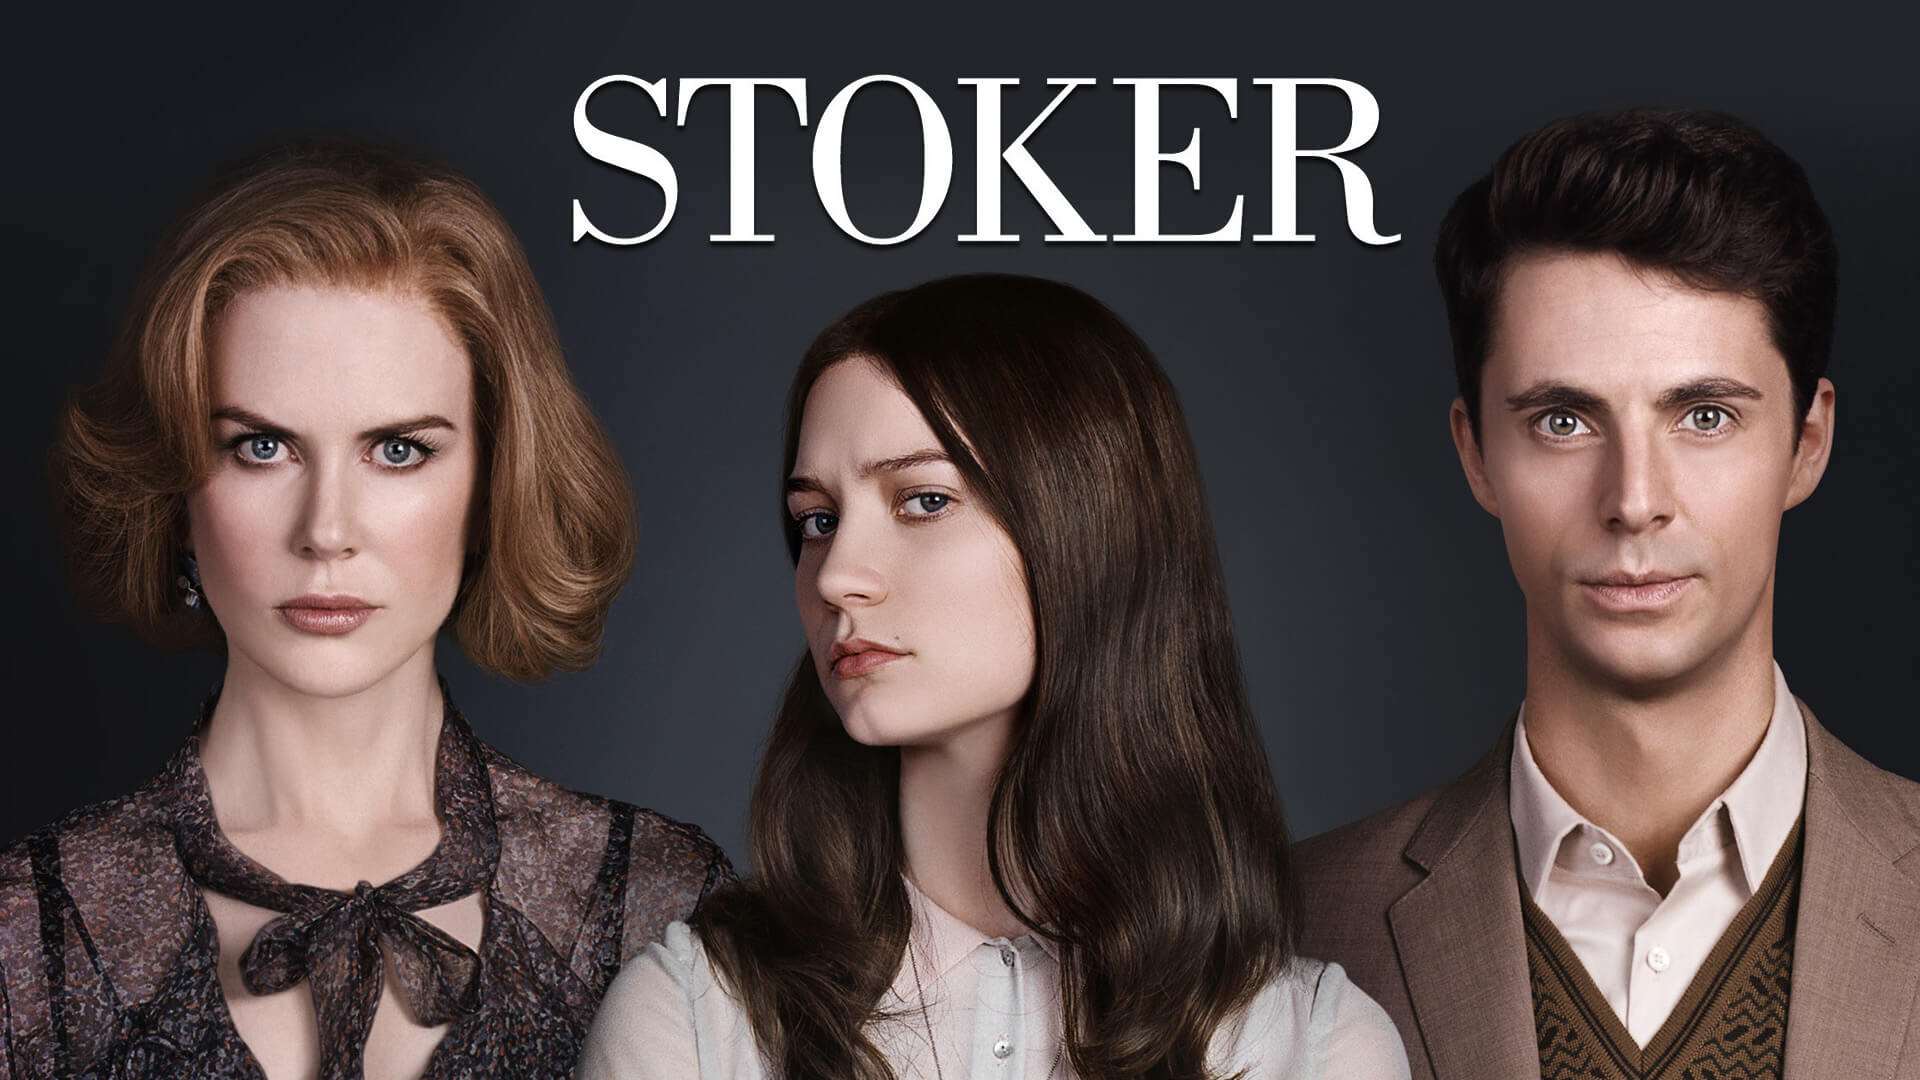 46-facts-about-the-movie-stoker